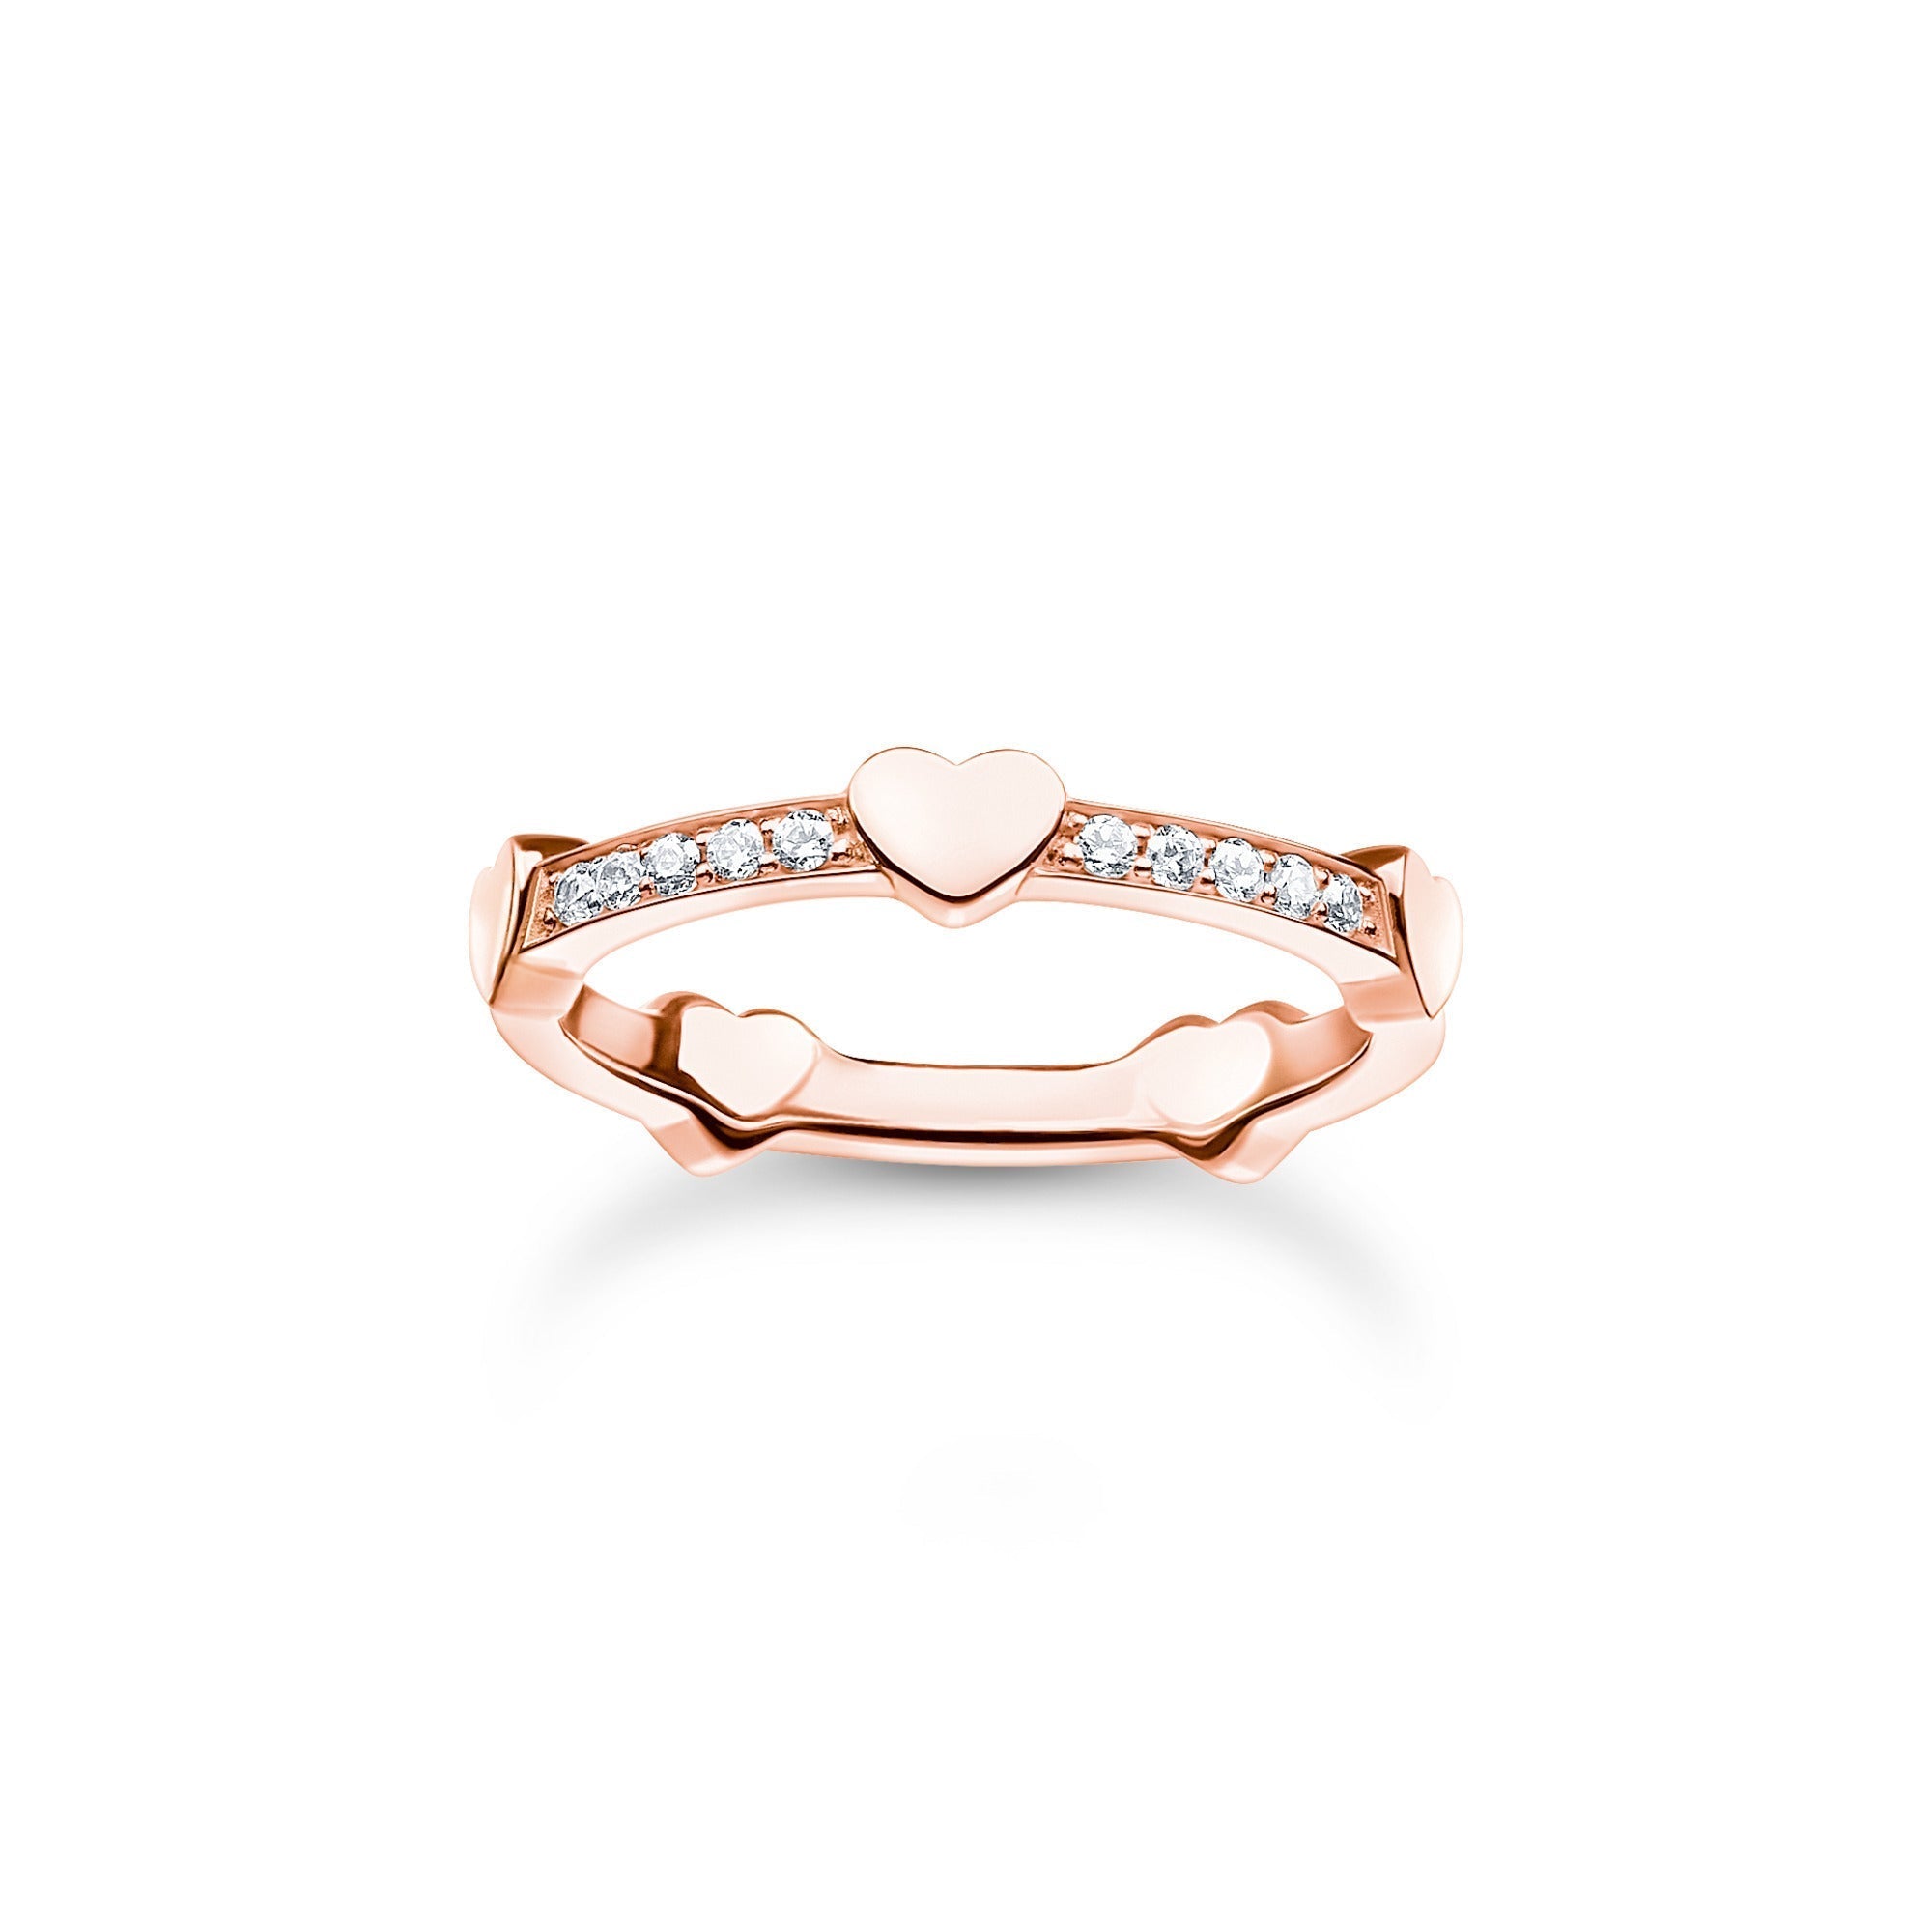 Thomas Sabo Charm Club Rose Gold Plated Sterling Silver Hearts Ring D